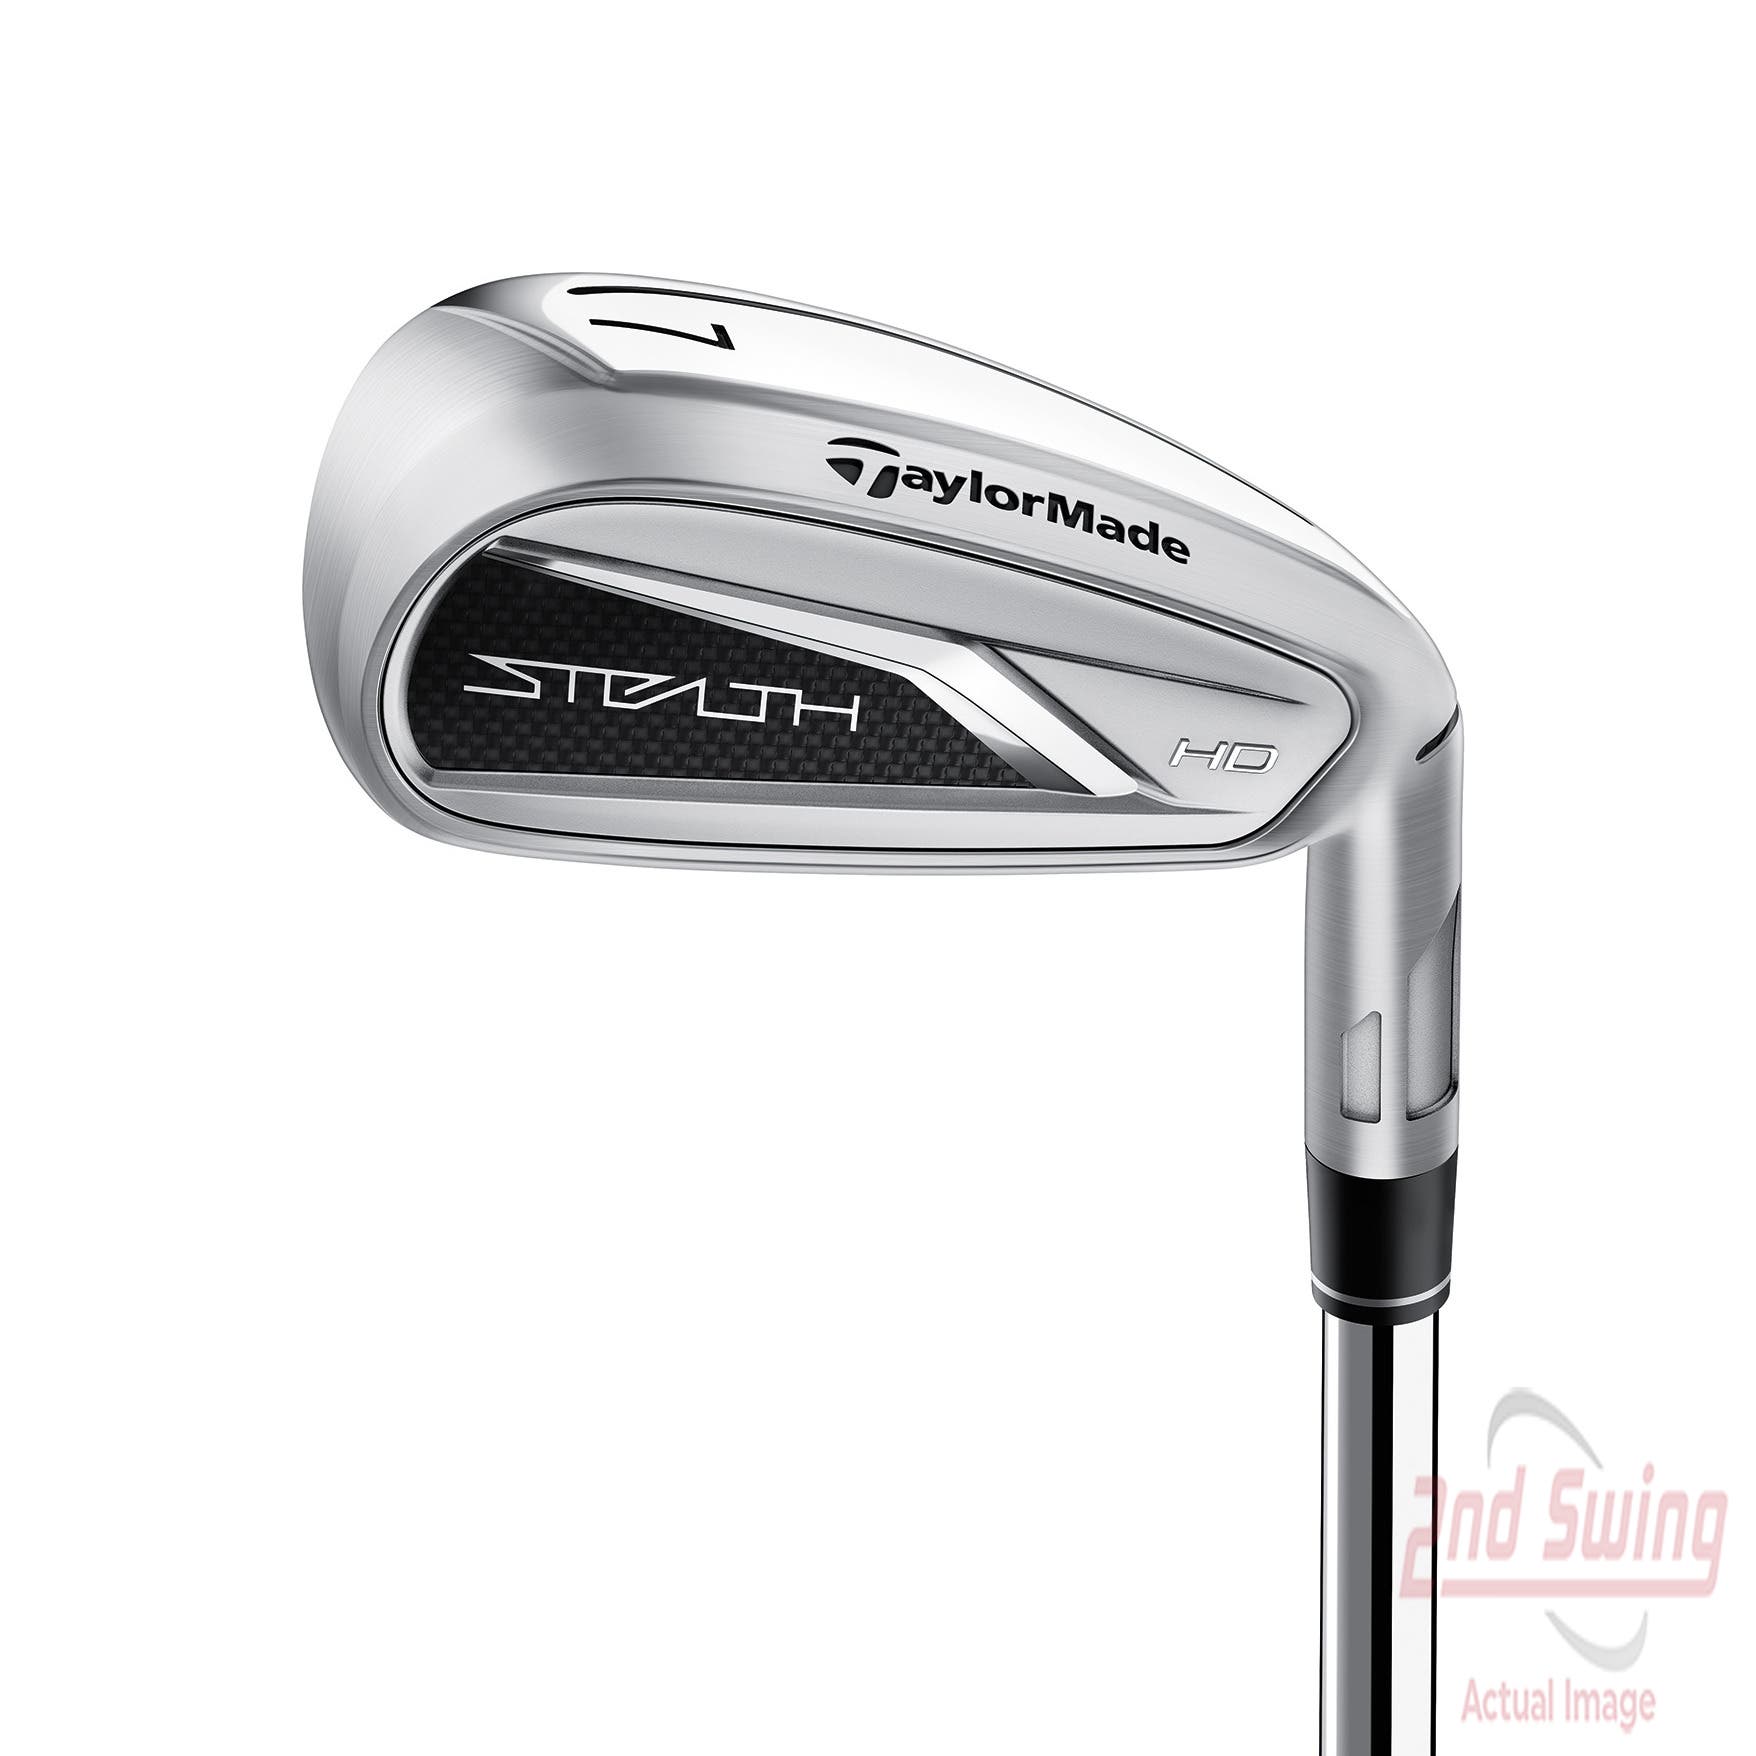 TaylorMade Stealth HD Single Iron (STEALTH HD NEW LIS) 2nd Swing Golf